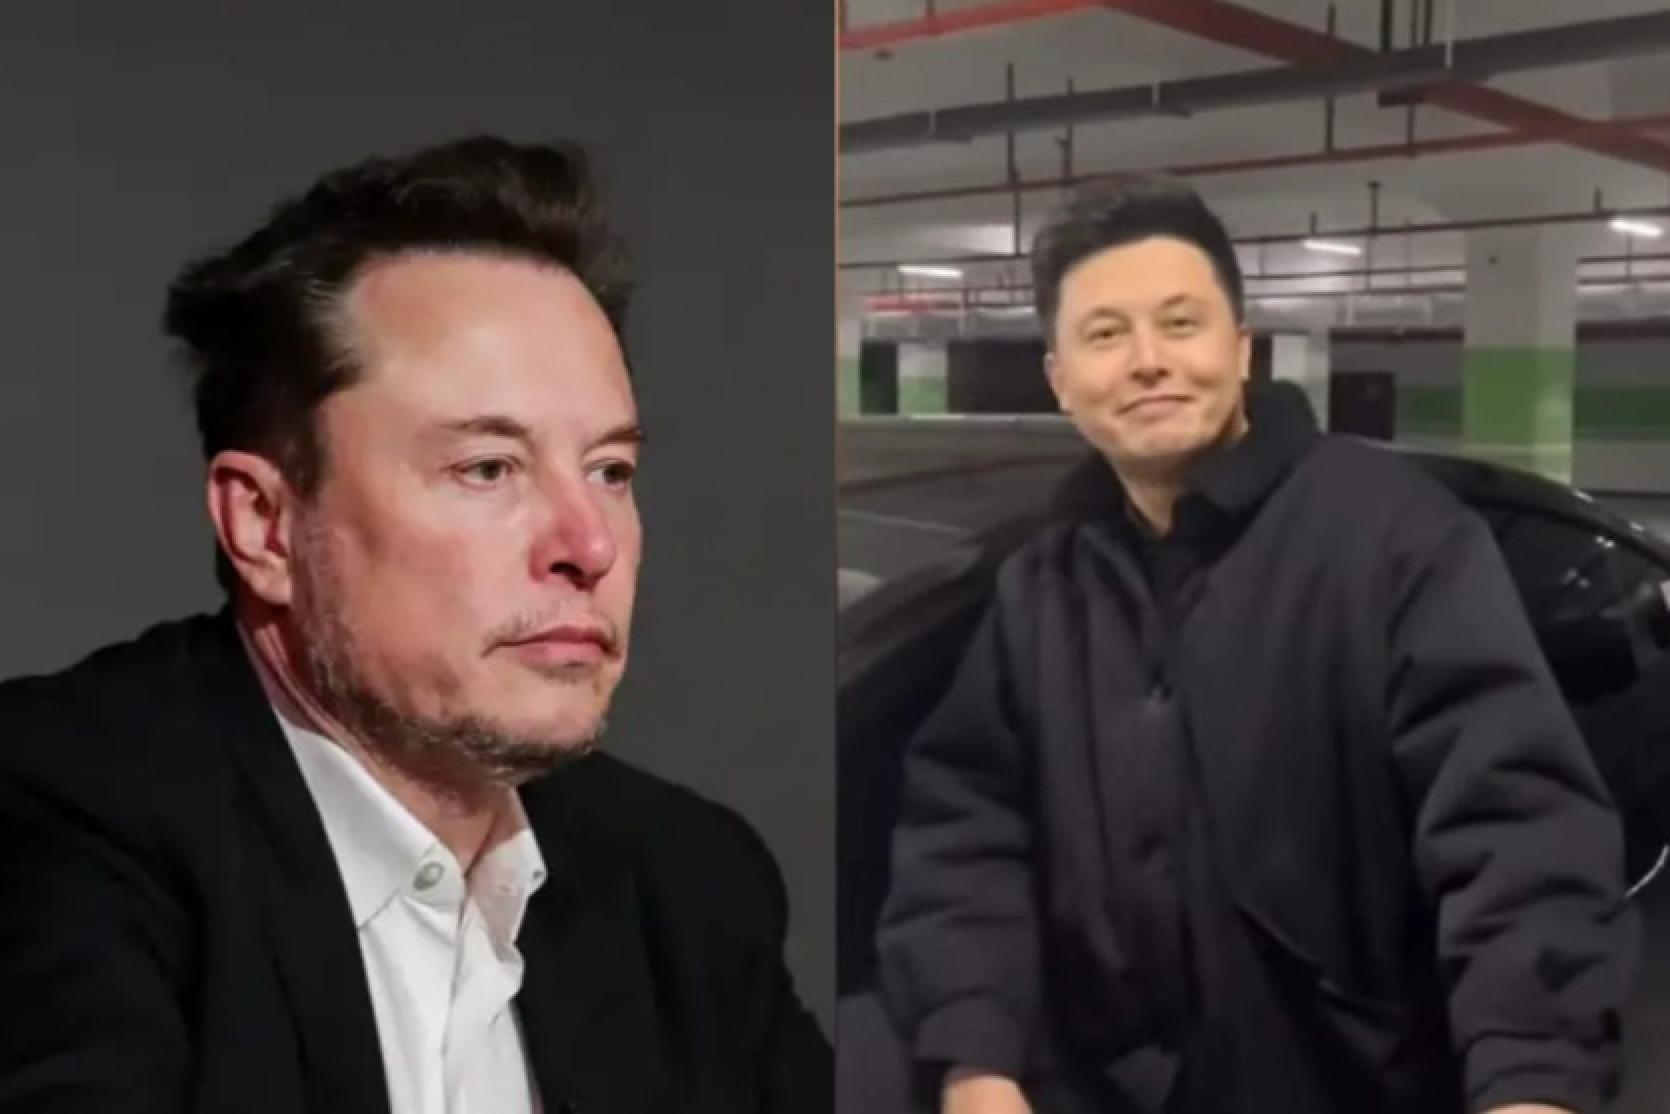 Korean woman fell in love with fake Ilon Musk - he talked about gigafactories and took $50k from her for "investment"